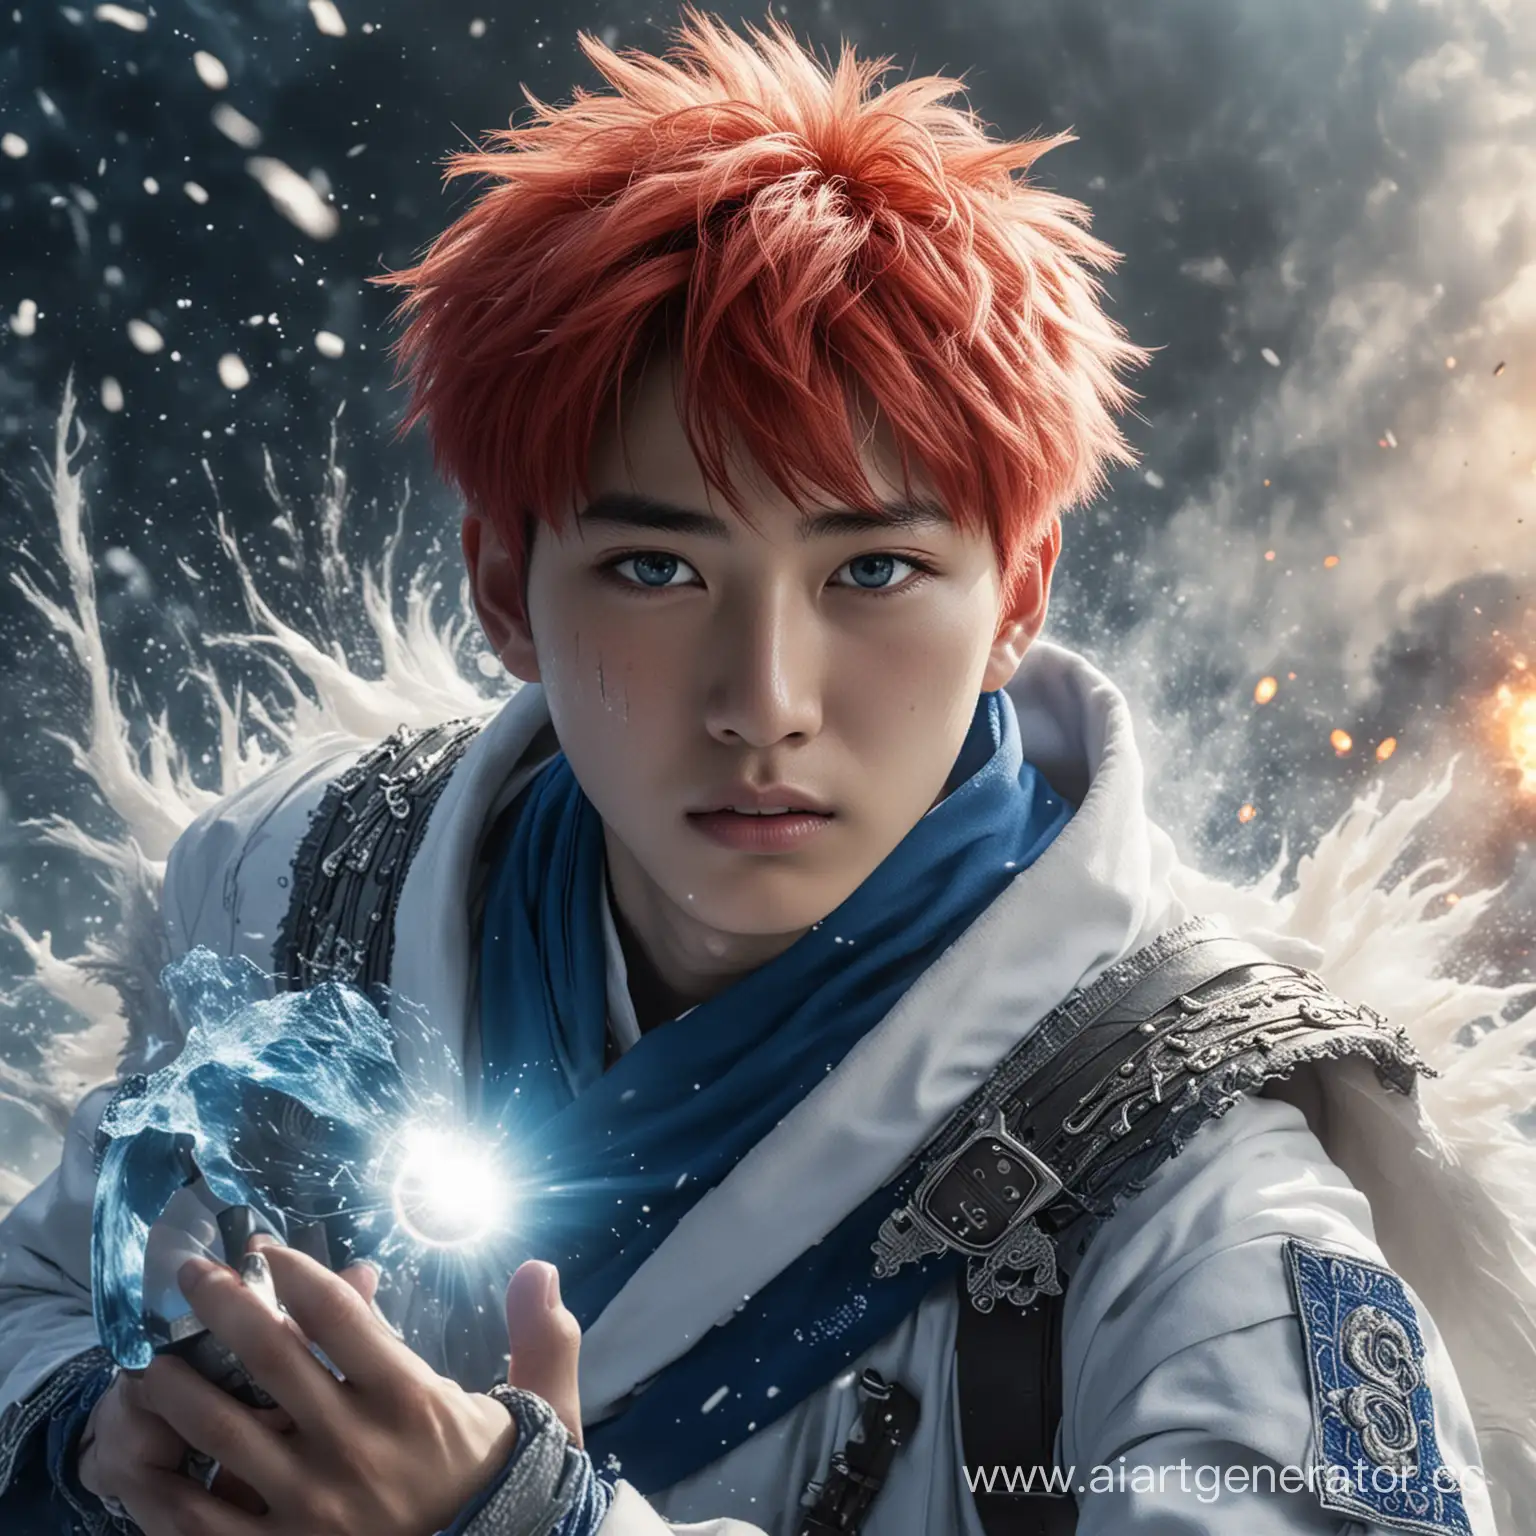 Heroic-Korean-Teen-with-Red-and-White-Hair-Amid-Icy-Explosion